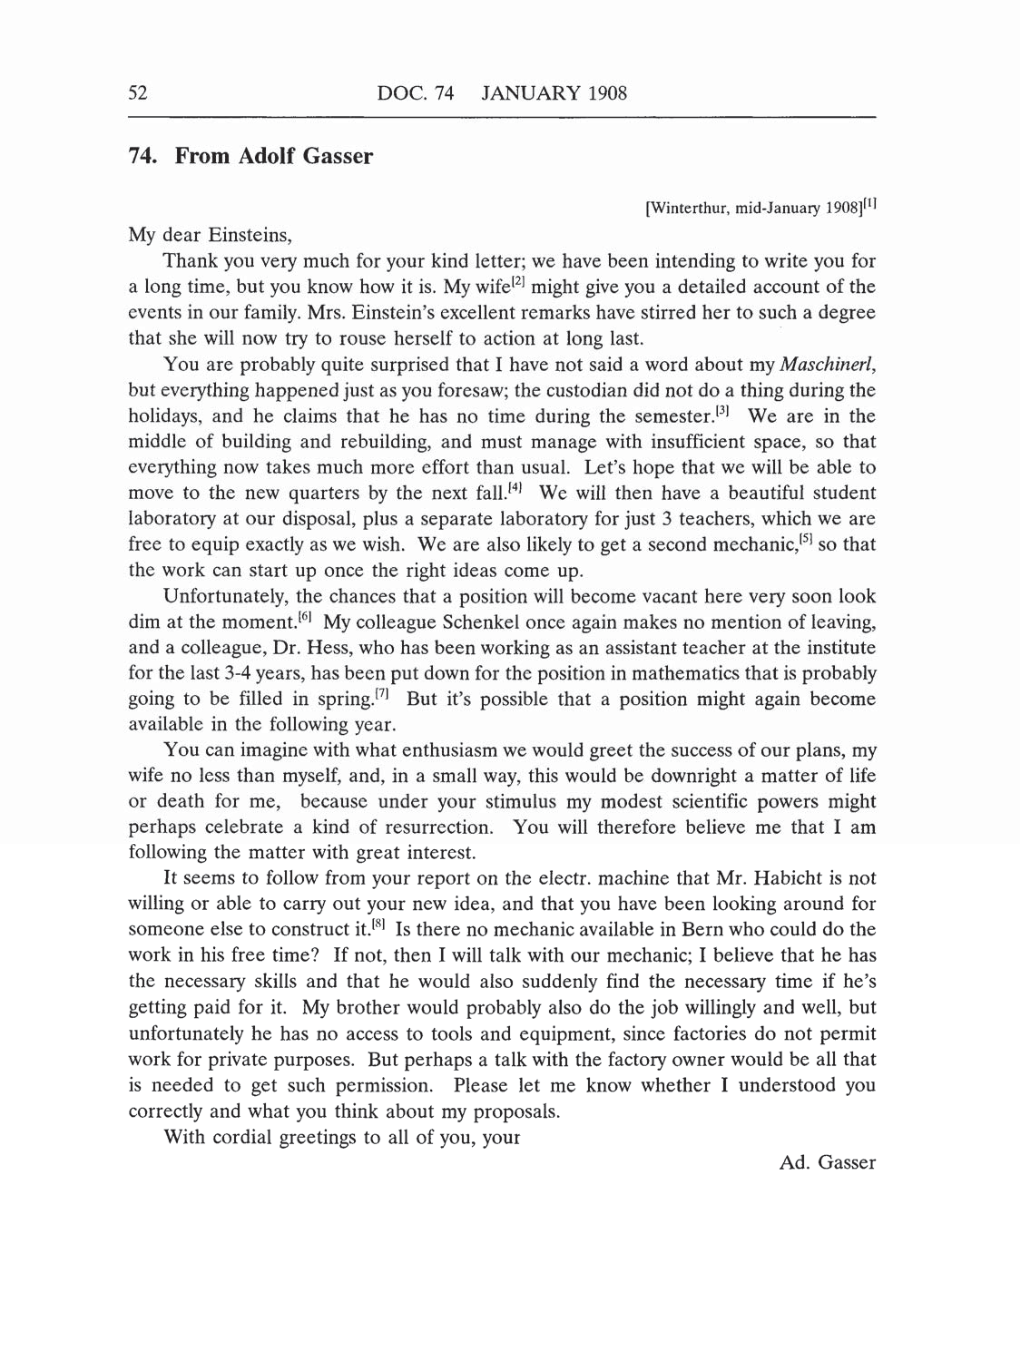 Volume 5: The Swiss Years: Correspondence, 1902-1914 (English translation supplement) page 52